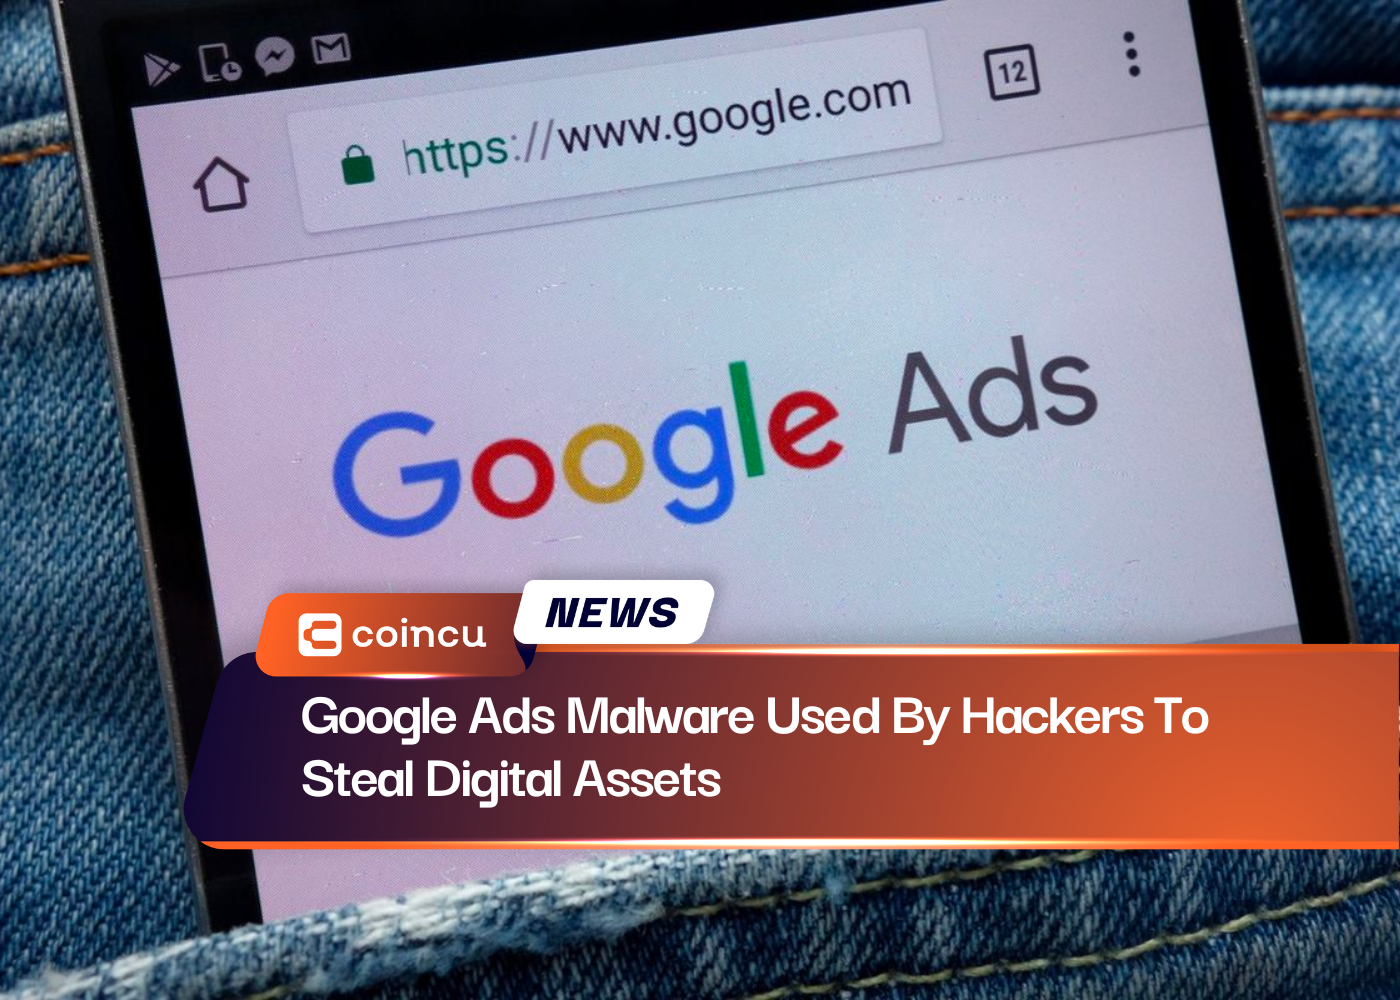 Google Ads Malware Used By Hackers To Steal Digital Assets